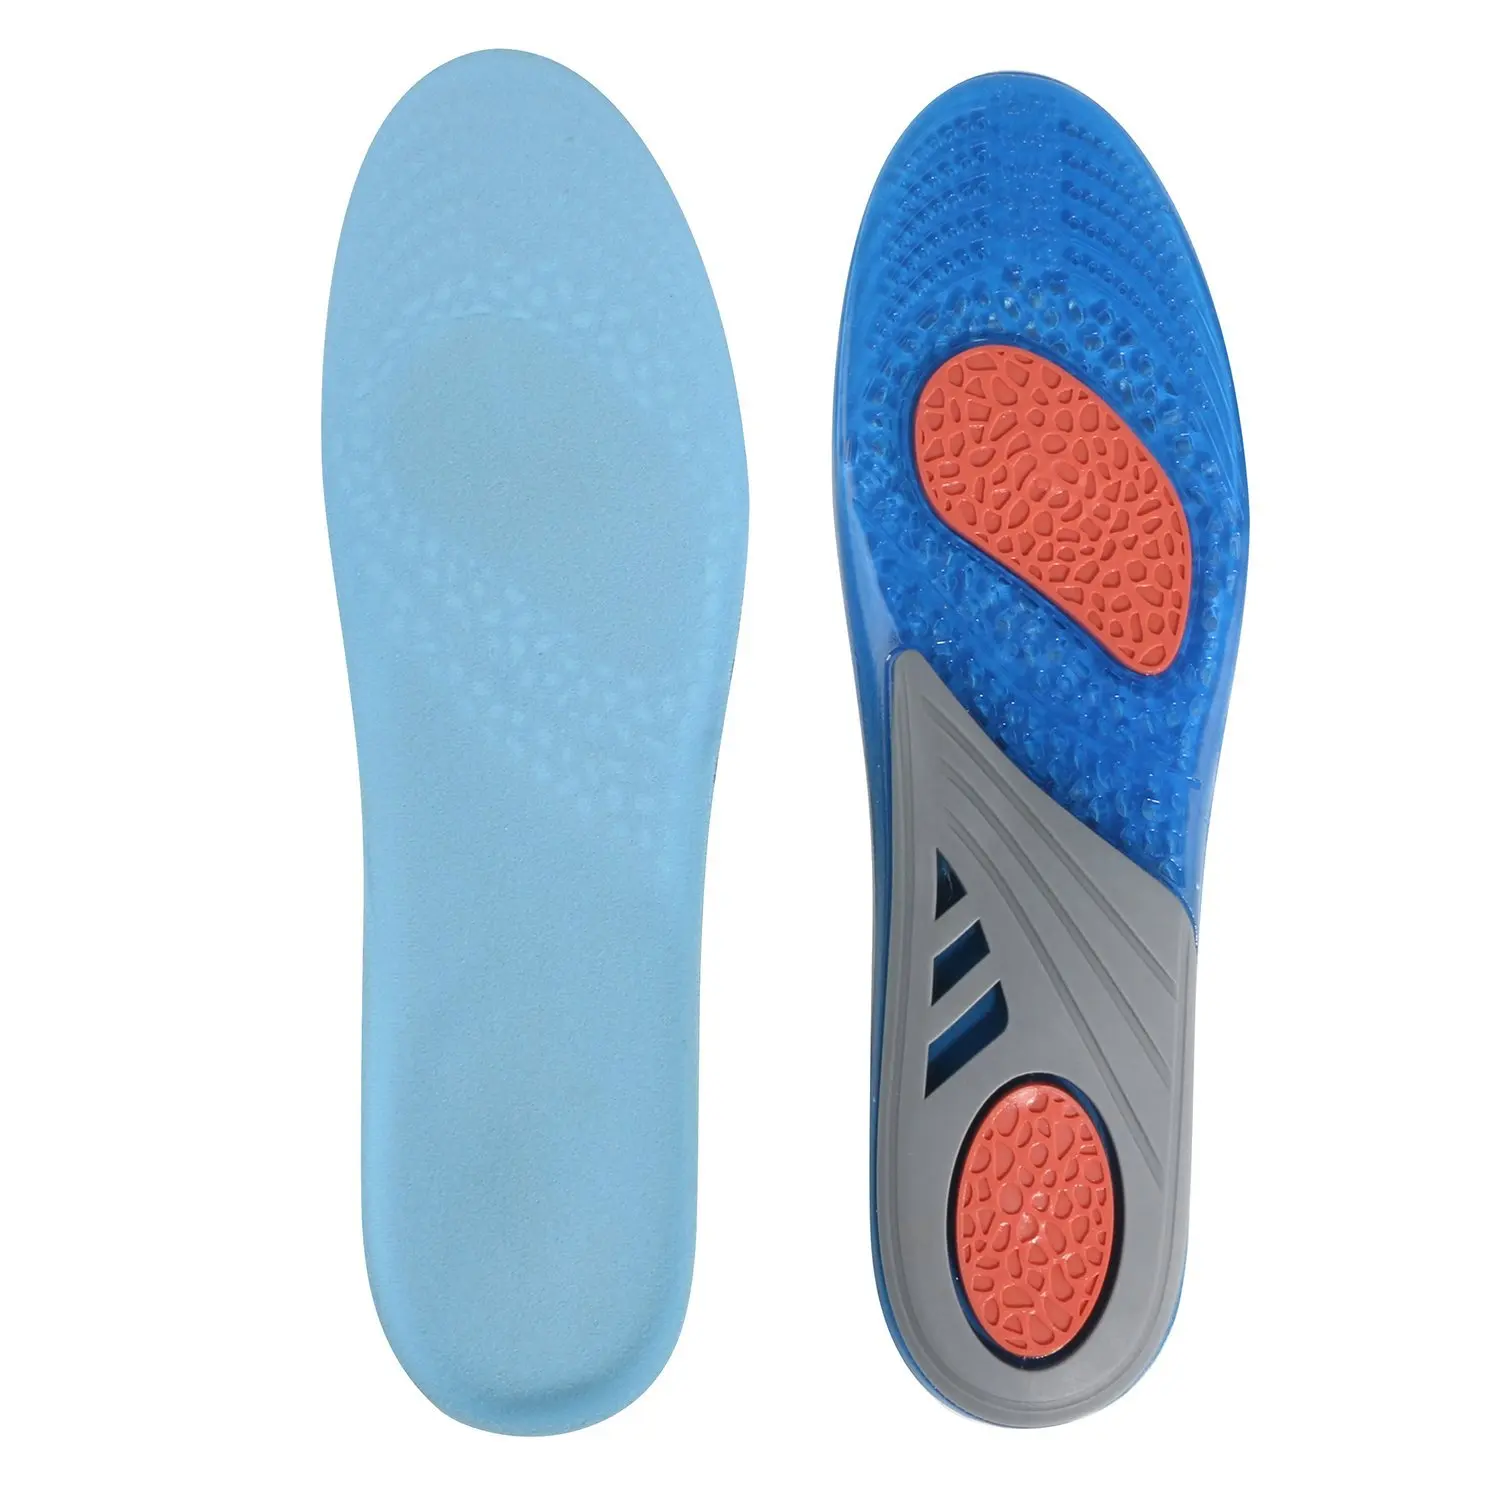 Buy Gel shoe Insoles Full Length Comfort Insert Insoles for Men and ...